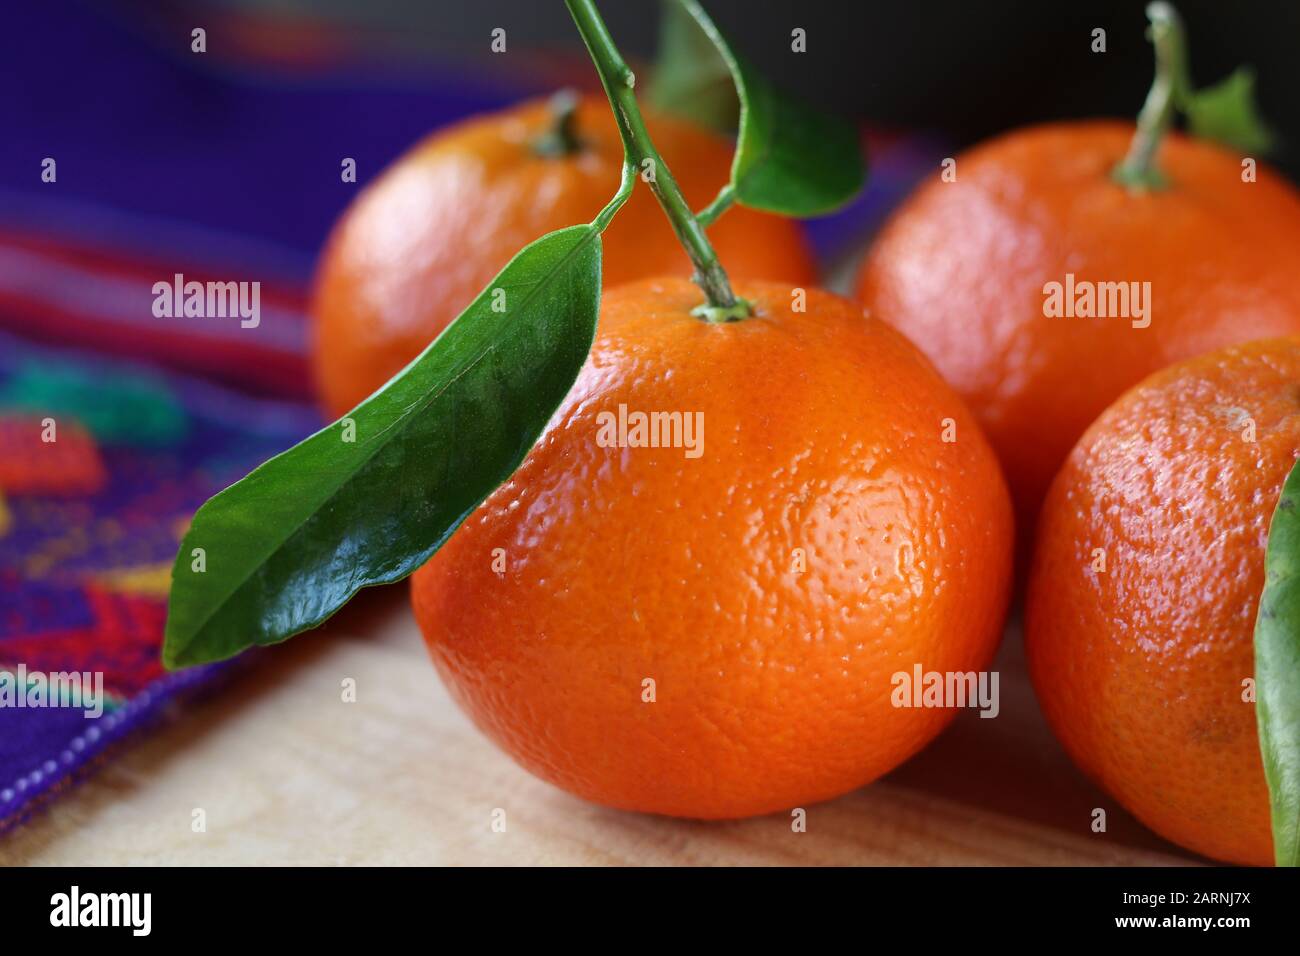 Side on view of fresh ripe mandarin oranges in close up, on a wooden table with colorful purple table cloth, with copyspace. Citrus reticulata Stock Photo